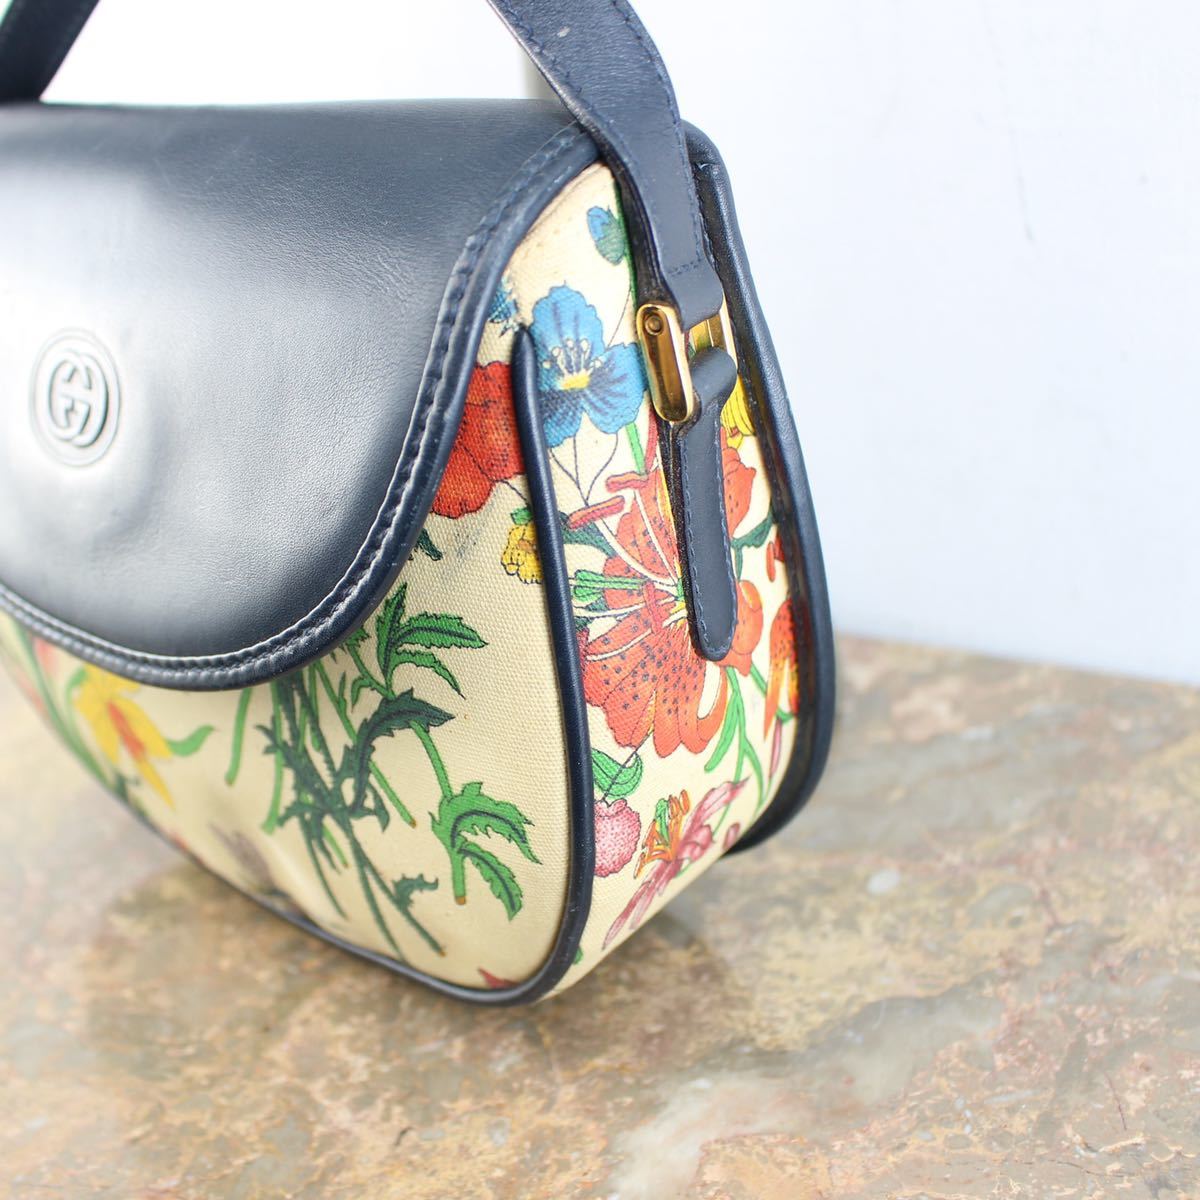 OLD GUCCI FLORA GG PATTERNED EMBOSSED SHOULDER BAG MADE IN ITALY